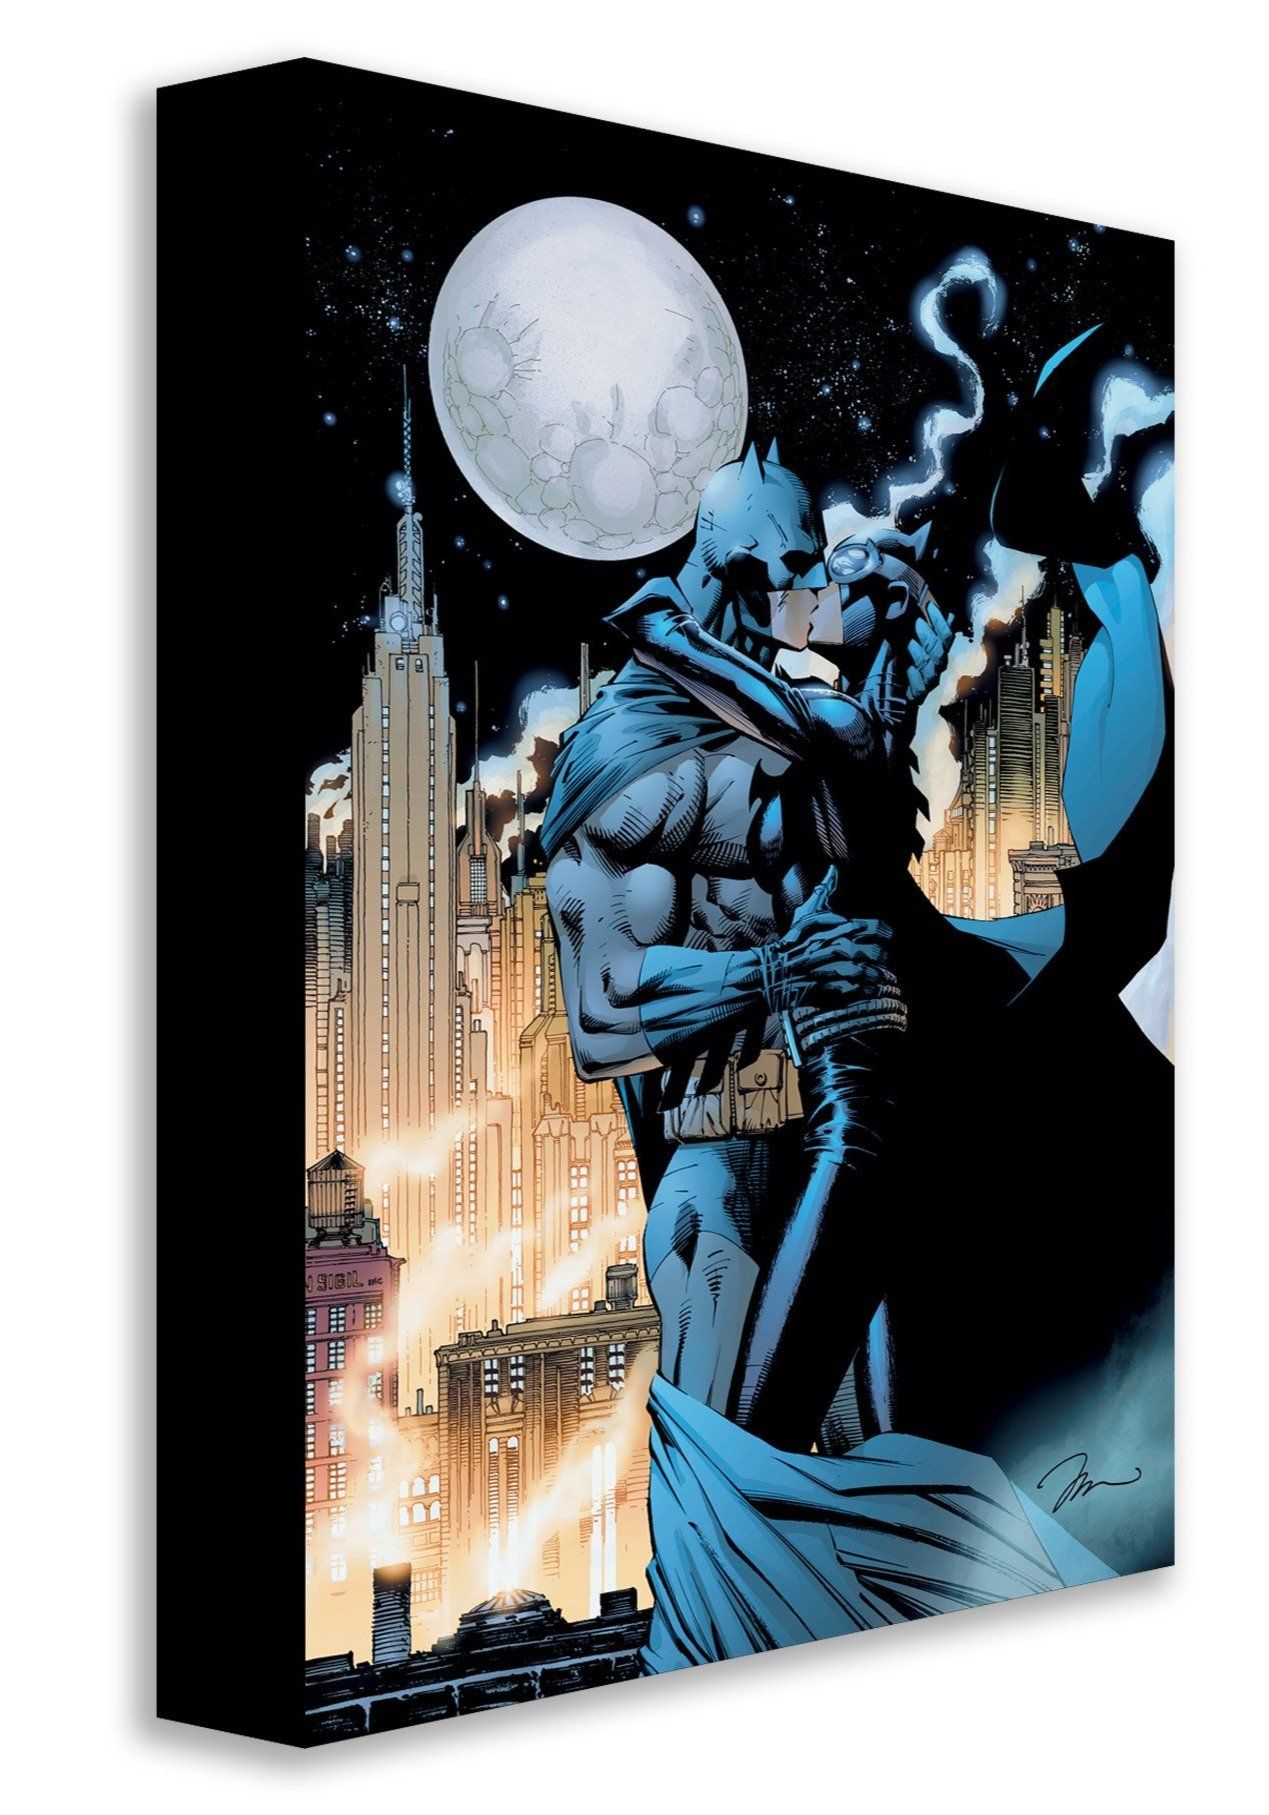 Kissing the Knight by Jim Lee  Batman and Catwoman embrace under the moonlight. 